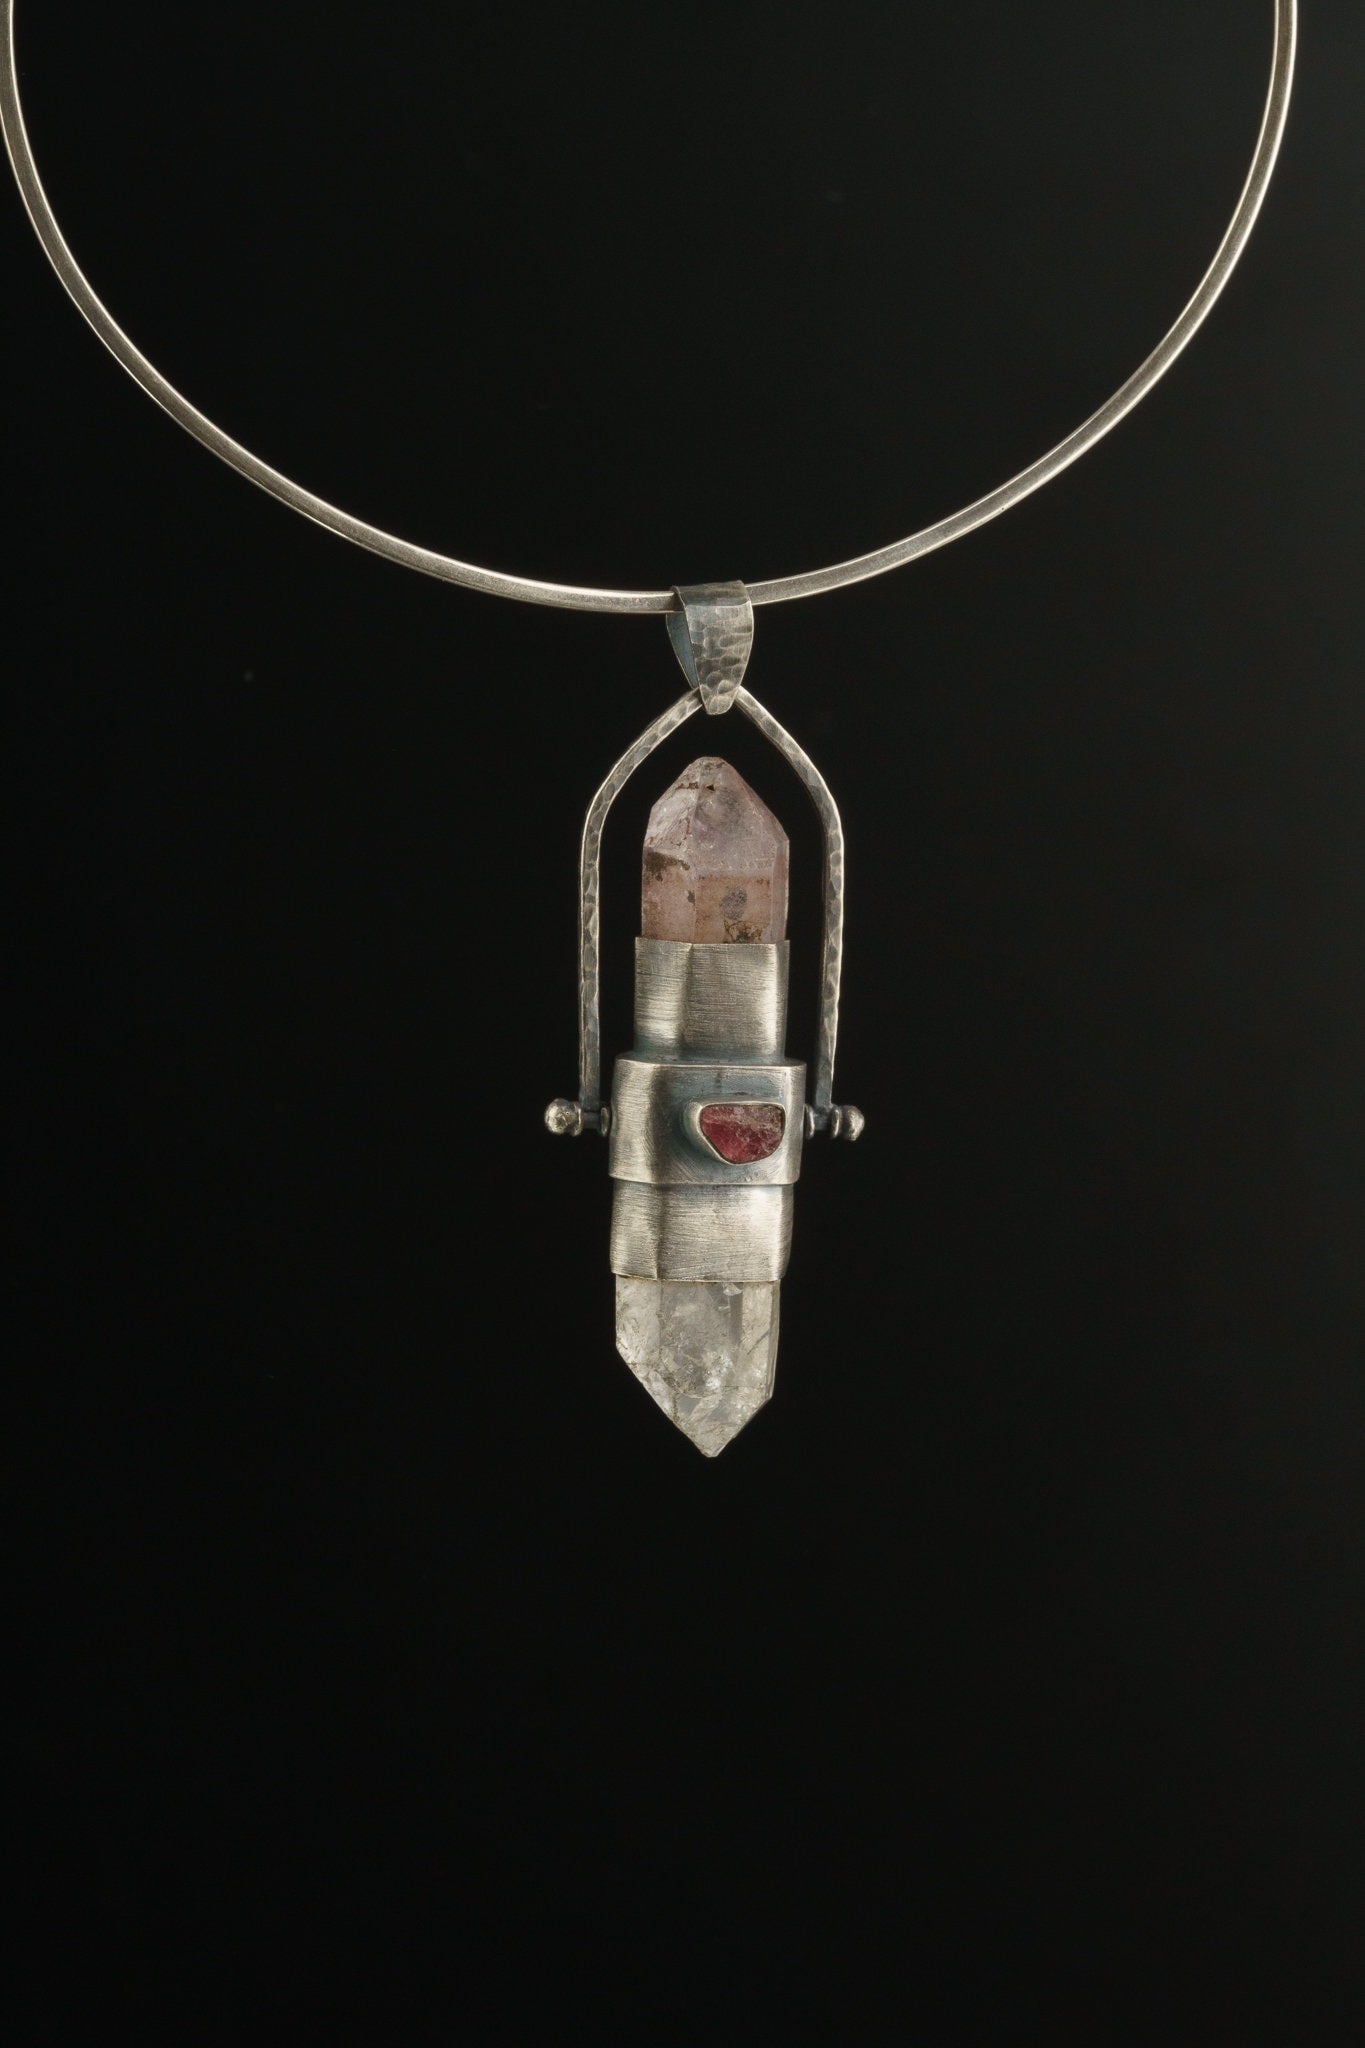 Himalayan & Vera Cruz Record Keeper Quartz with Pink Tourmaline / Faceted Ethiopian Opal - Textured Sterling Silver - Spinning Pendant